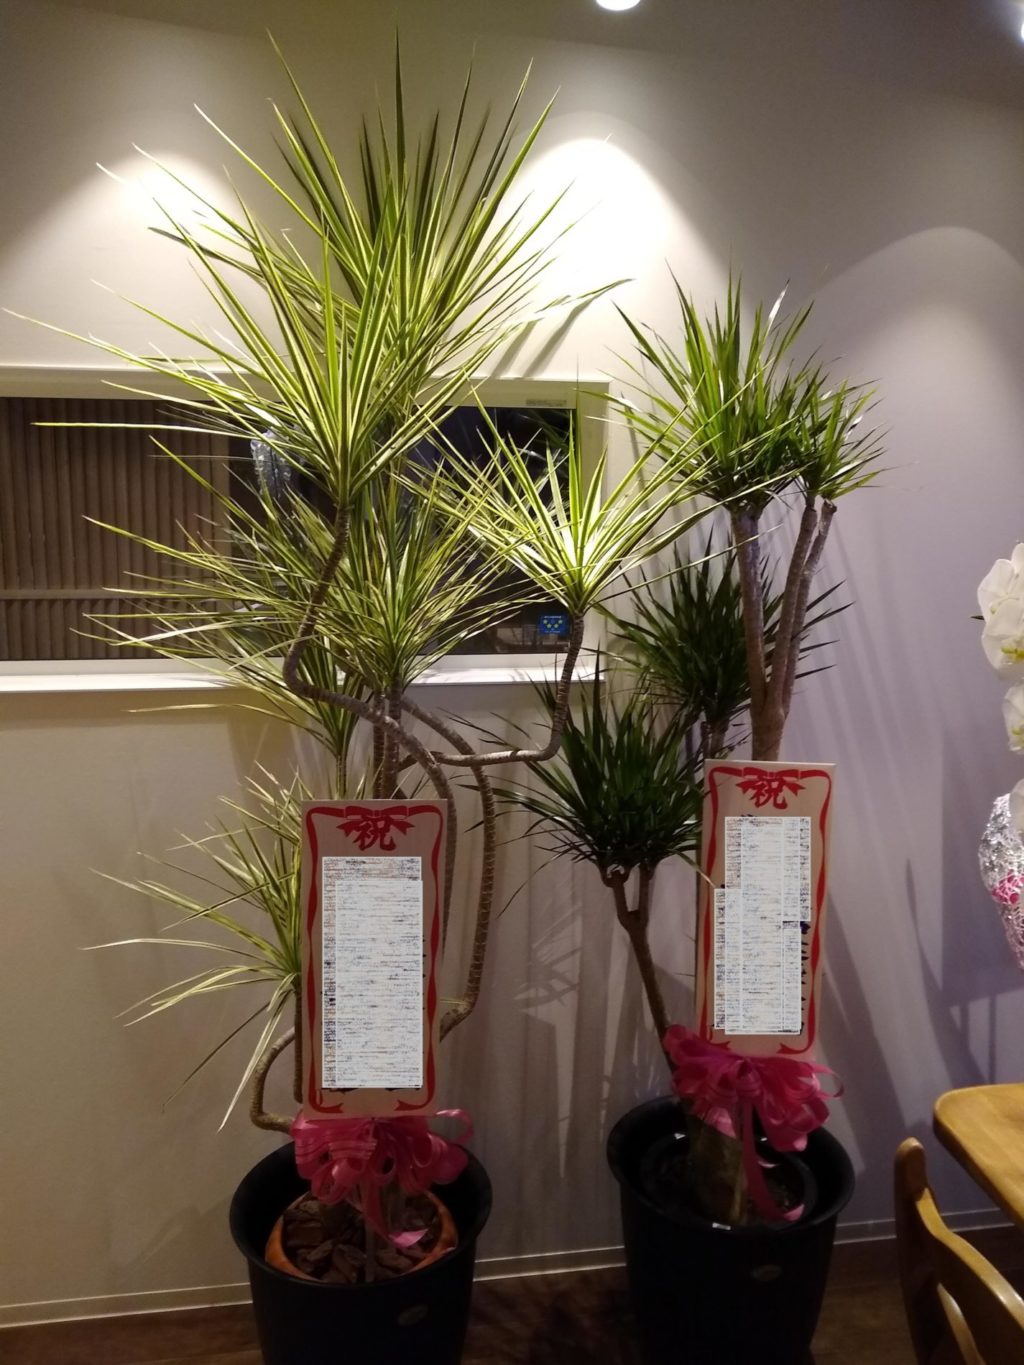 Celebration foliage plant: 15,000 yen tax included and up